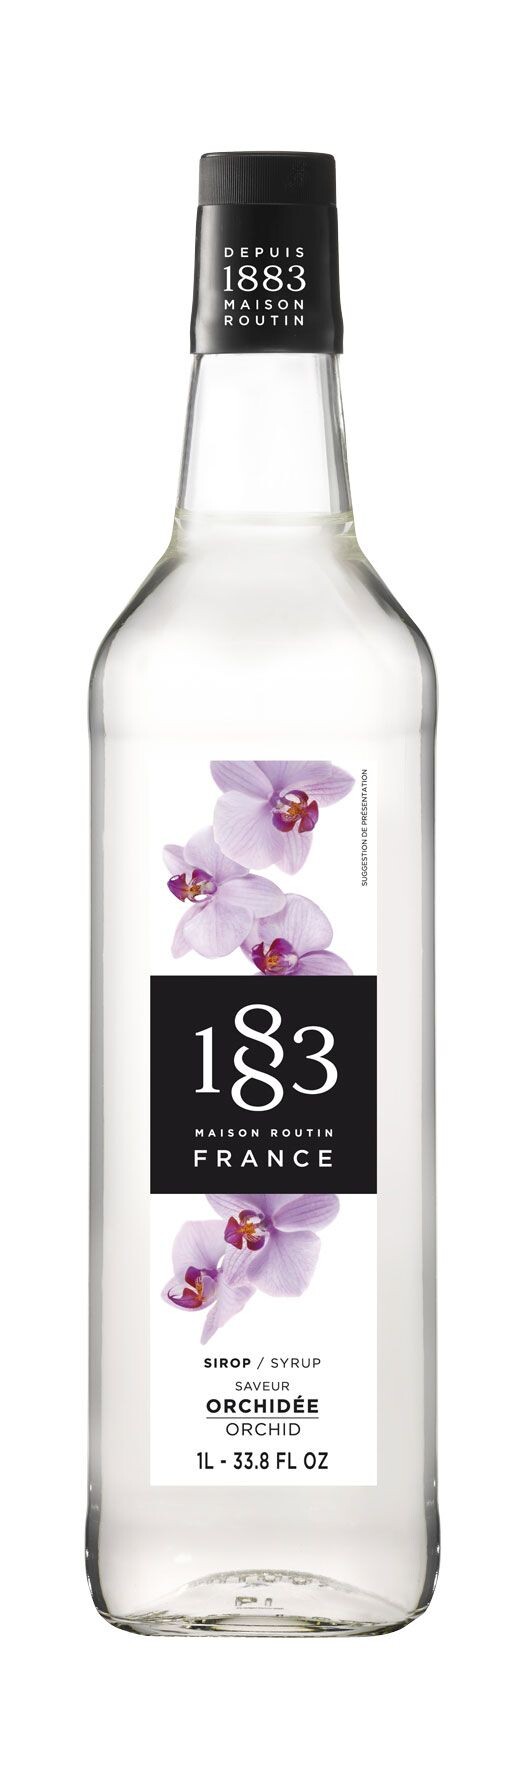 Routin 1883 Orchid Syrup 1L 0%